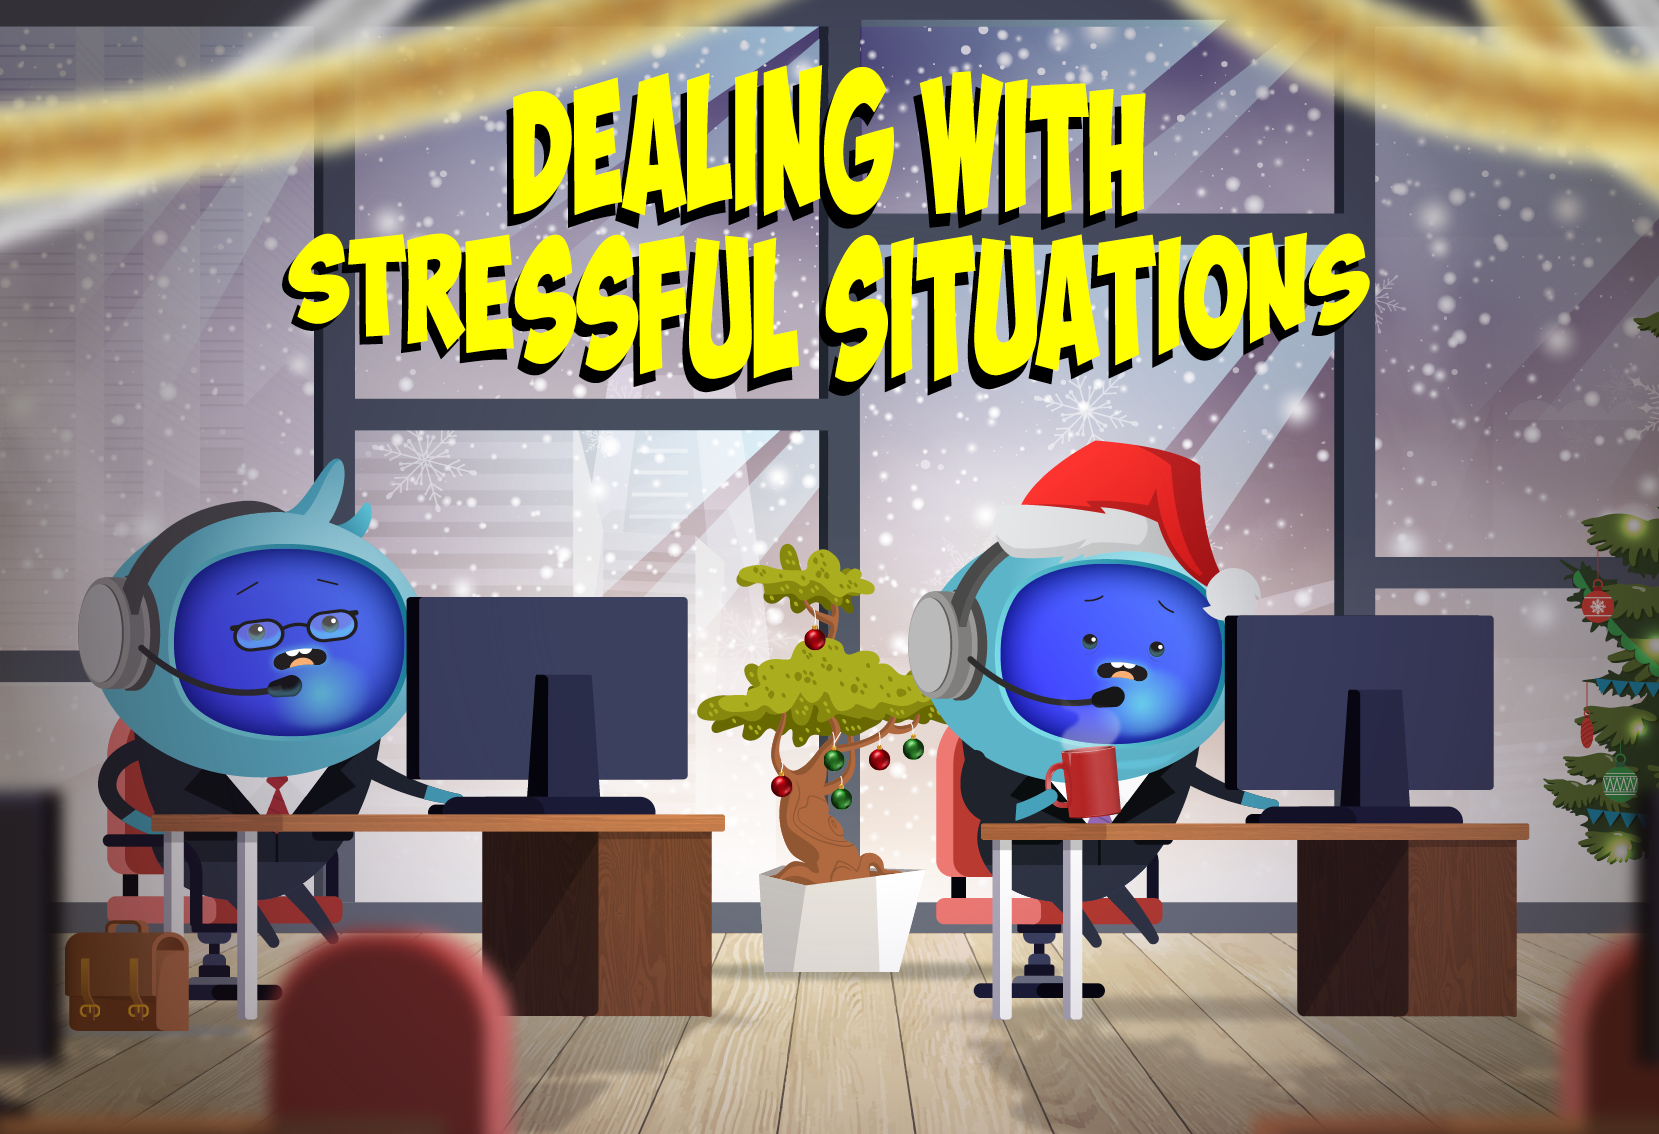 iAM 00223 - Dealing with Stressful Situations - LMS Thumbnail